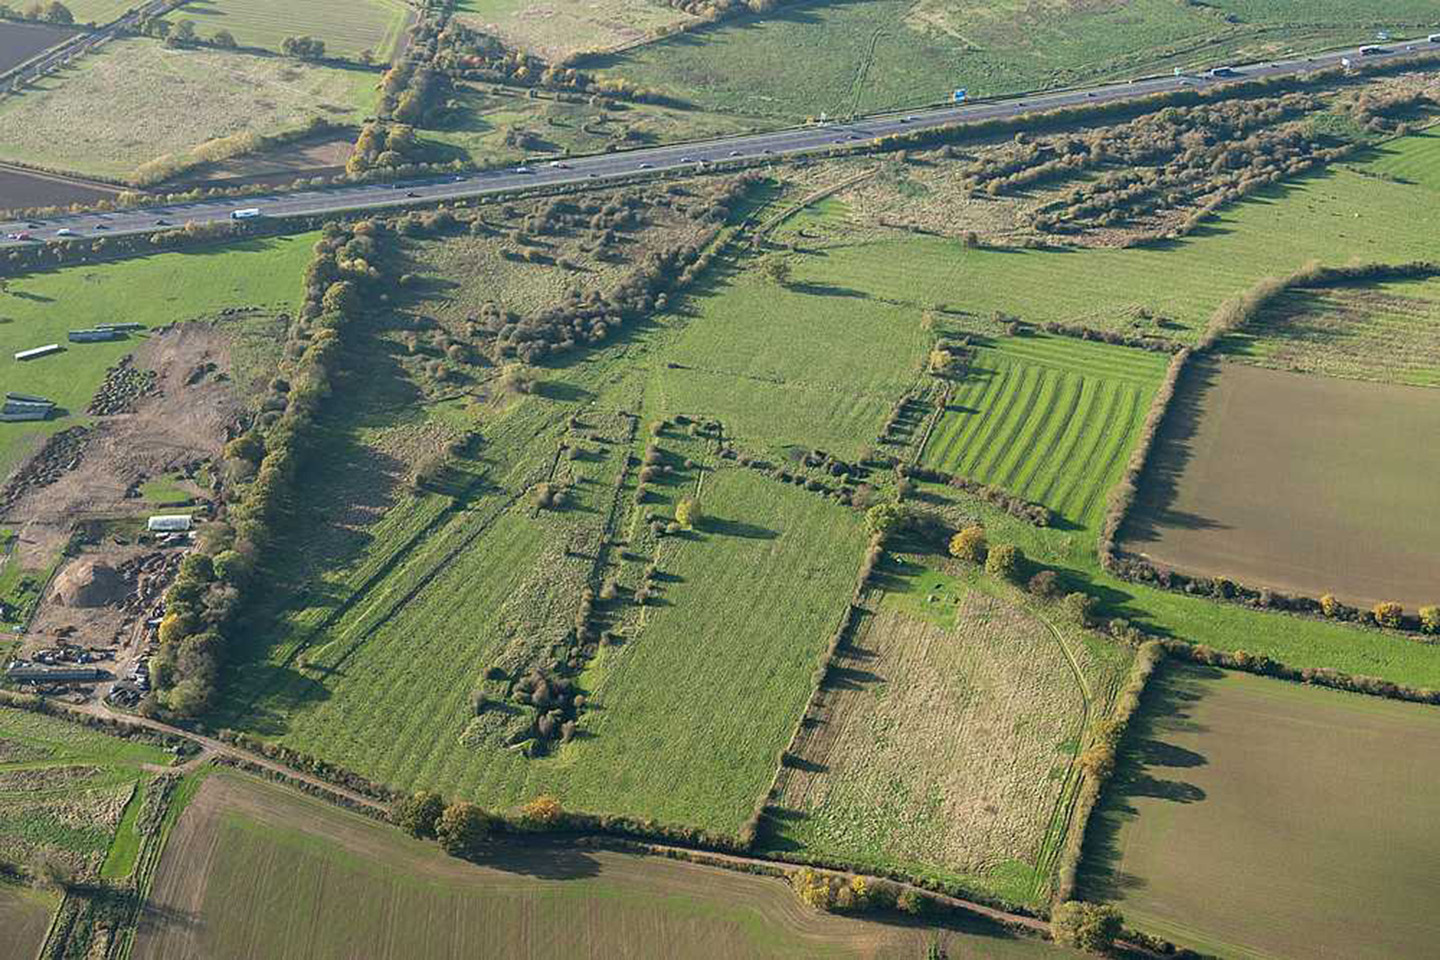 National Filling Factory Banbury, Northampton, aerial photograph showing the earthwork remains of the factory overlying traces of earlier ridge and furrow cultivation.